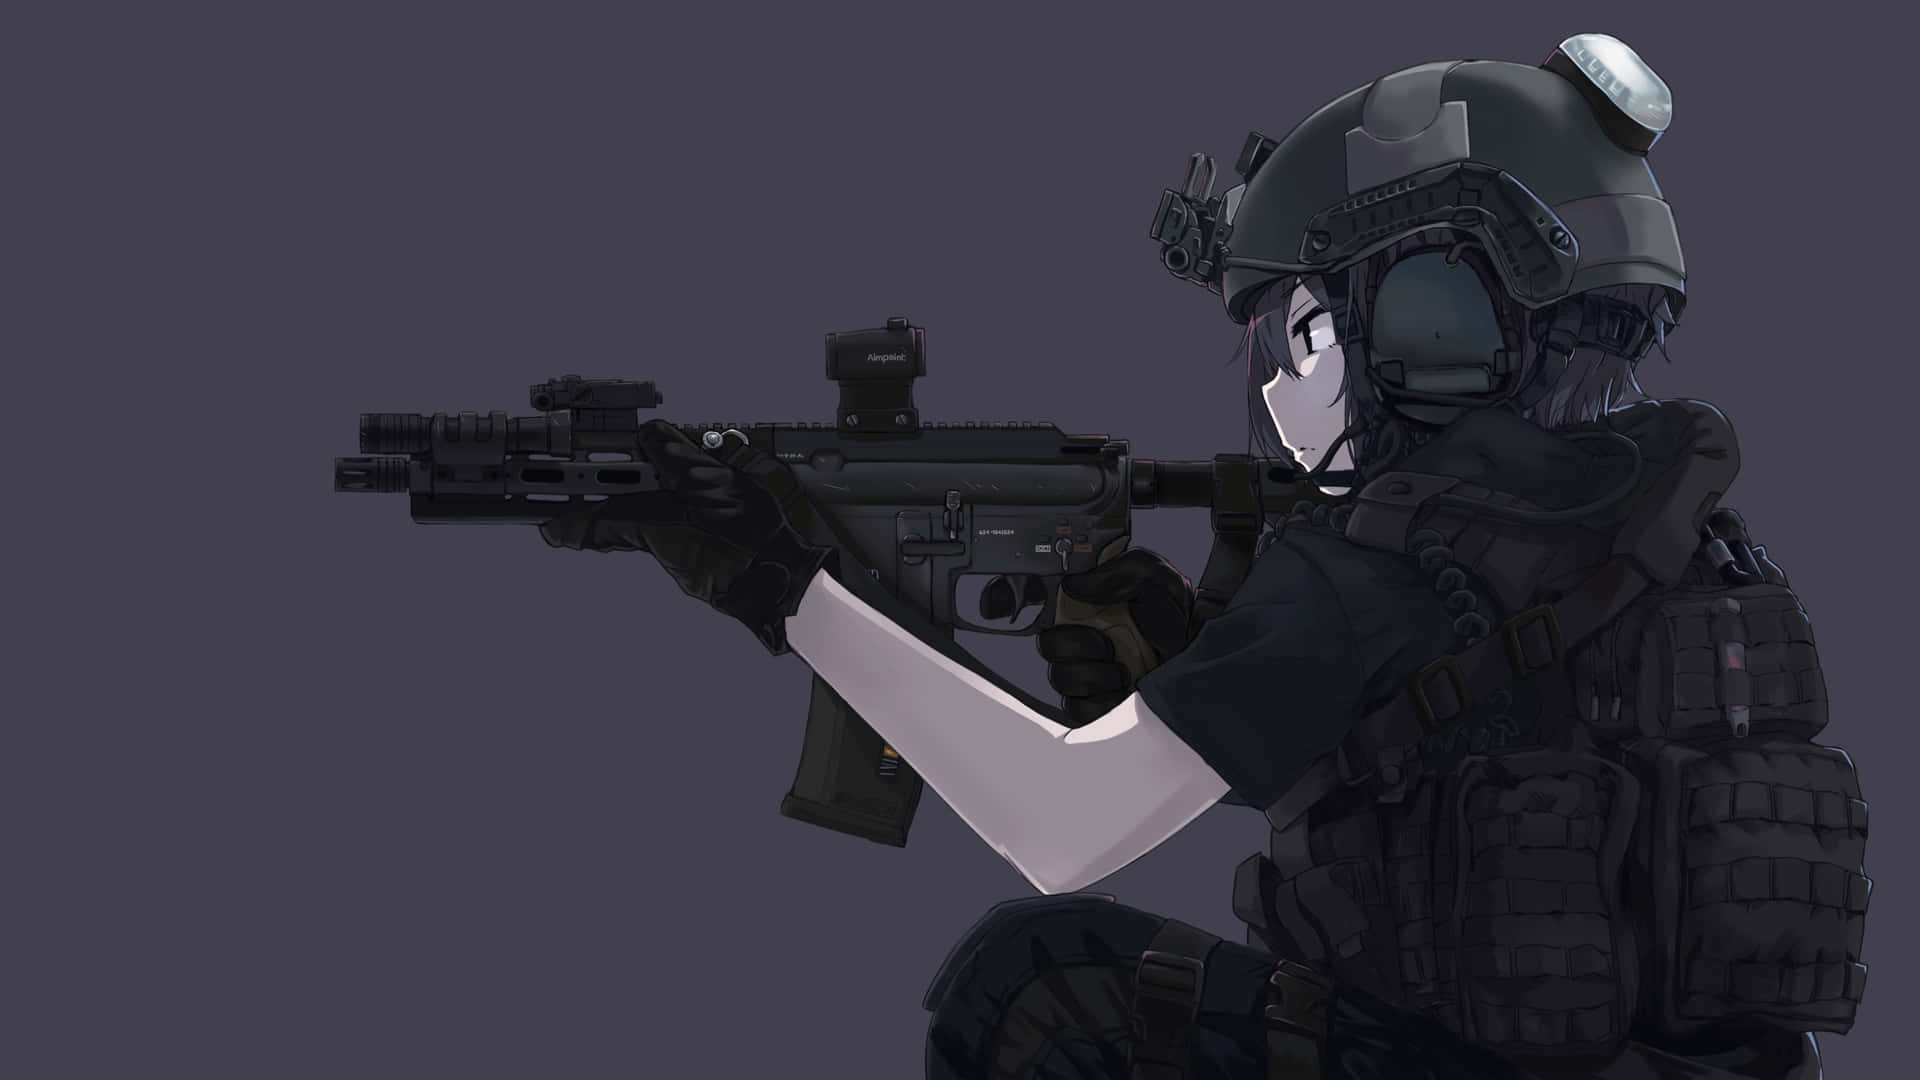 A member of the elite Special Weapons and Tactics (SWAT) team. Wallpaper